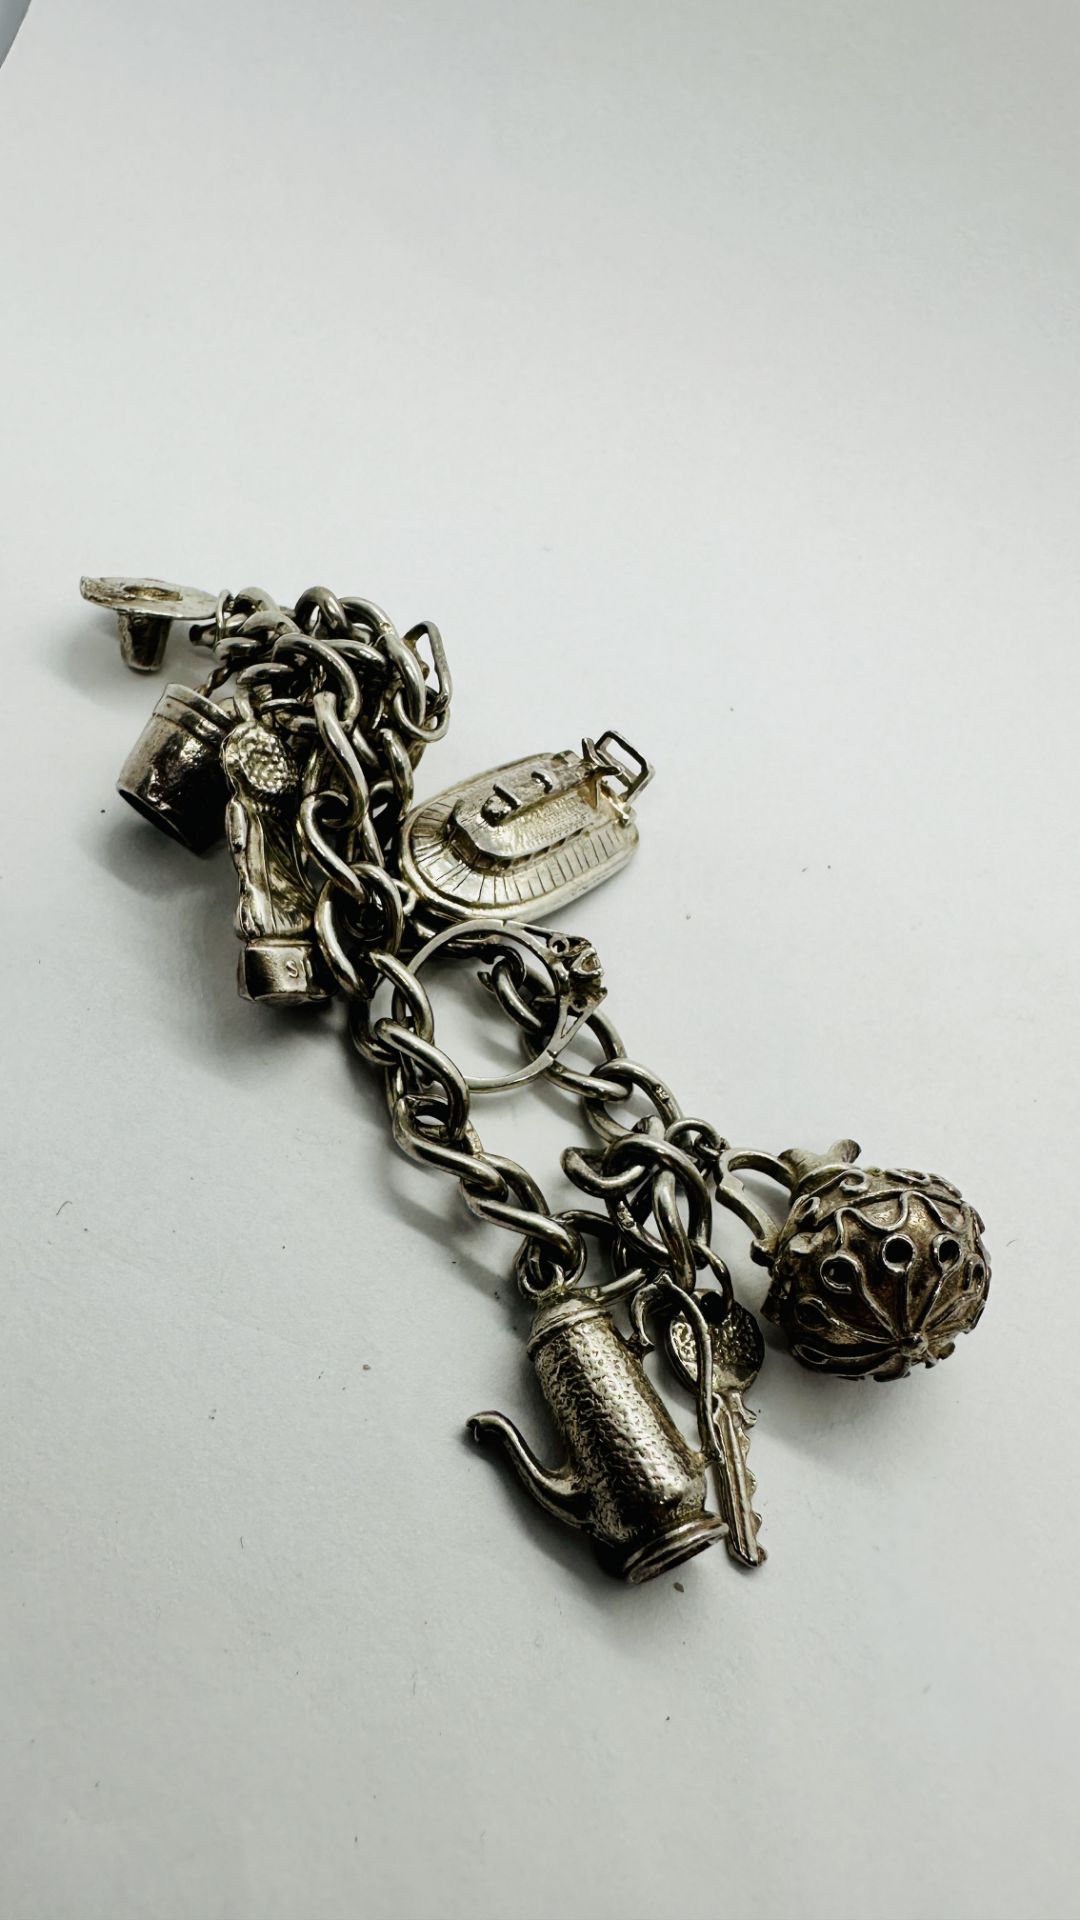 VINTAGE SILVER 925 CHARM BRACELET - 9 CHARMS ATTACHED. - Image 7 of 8